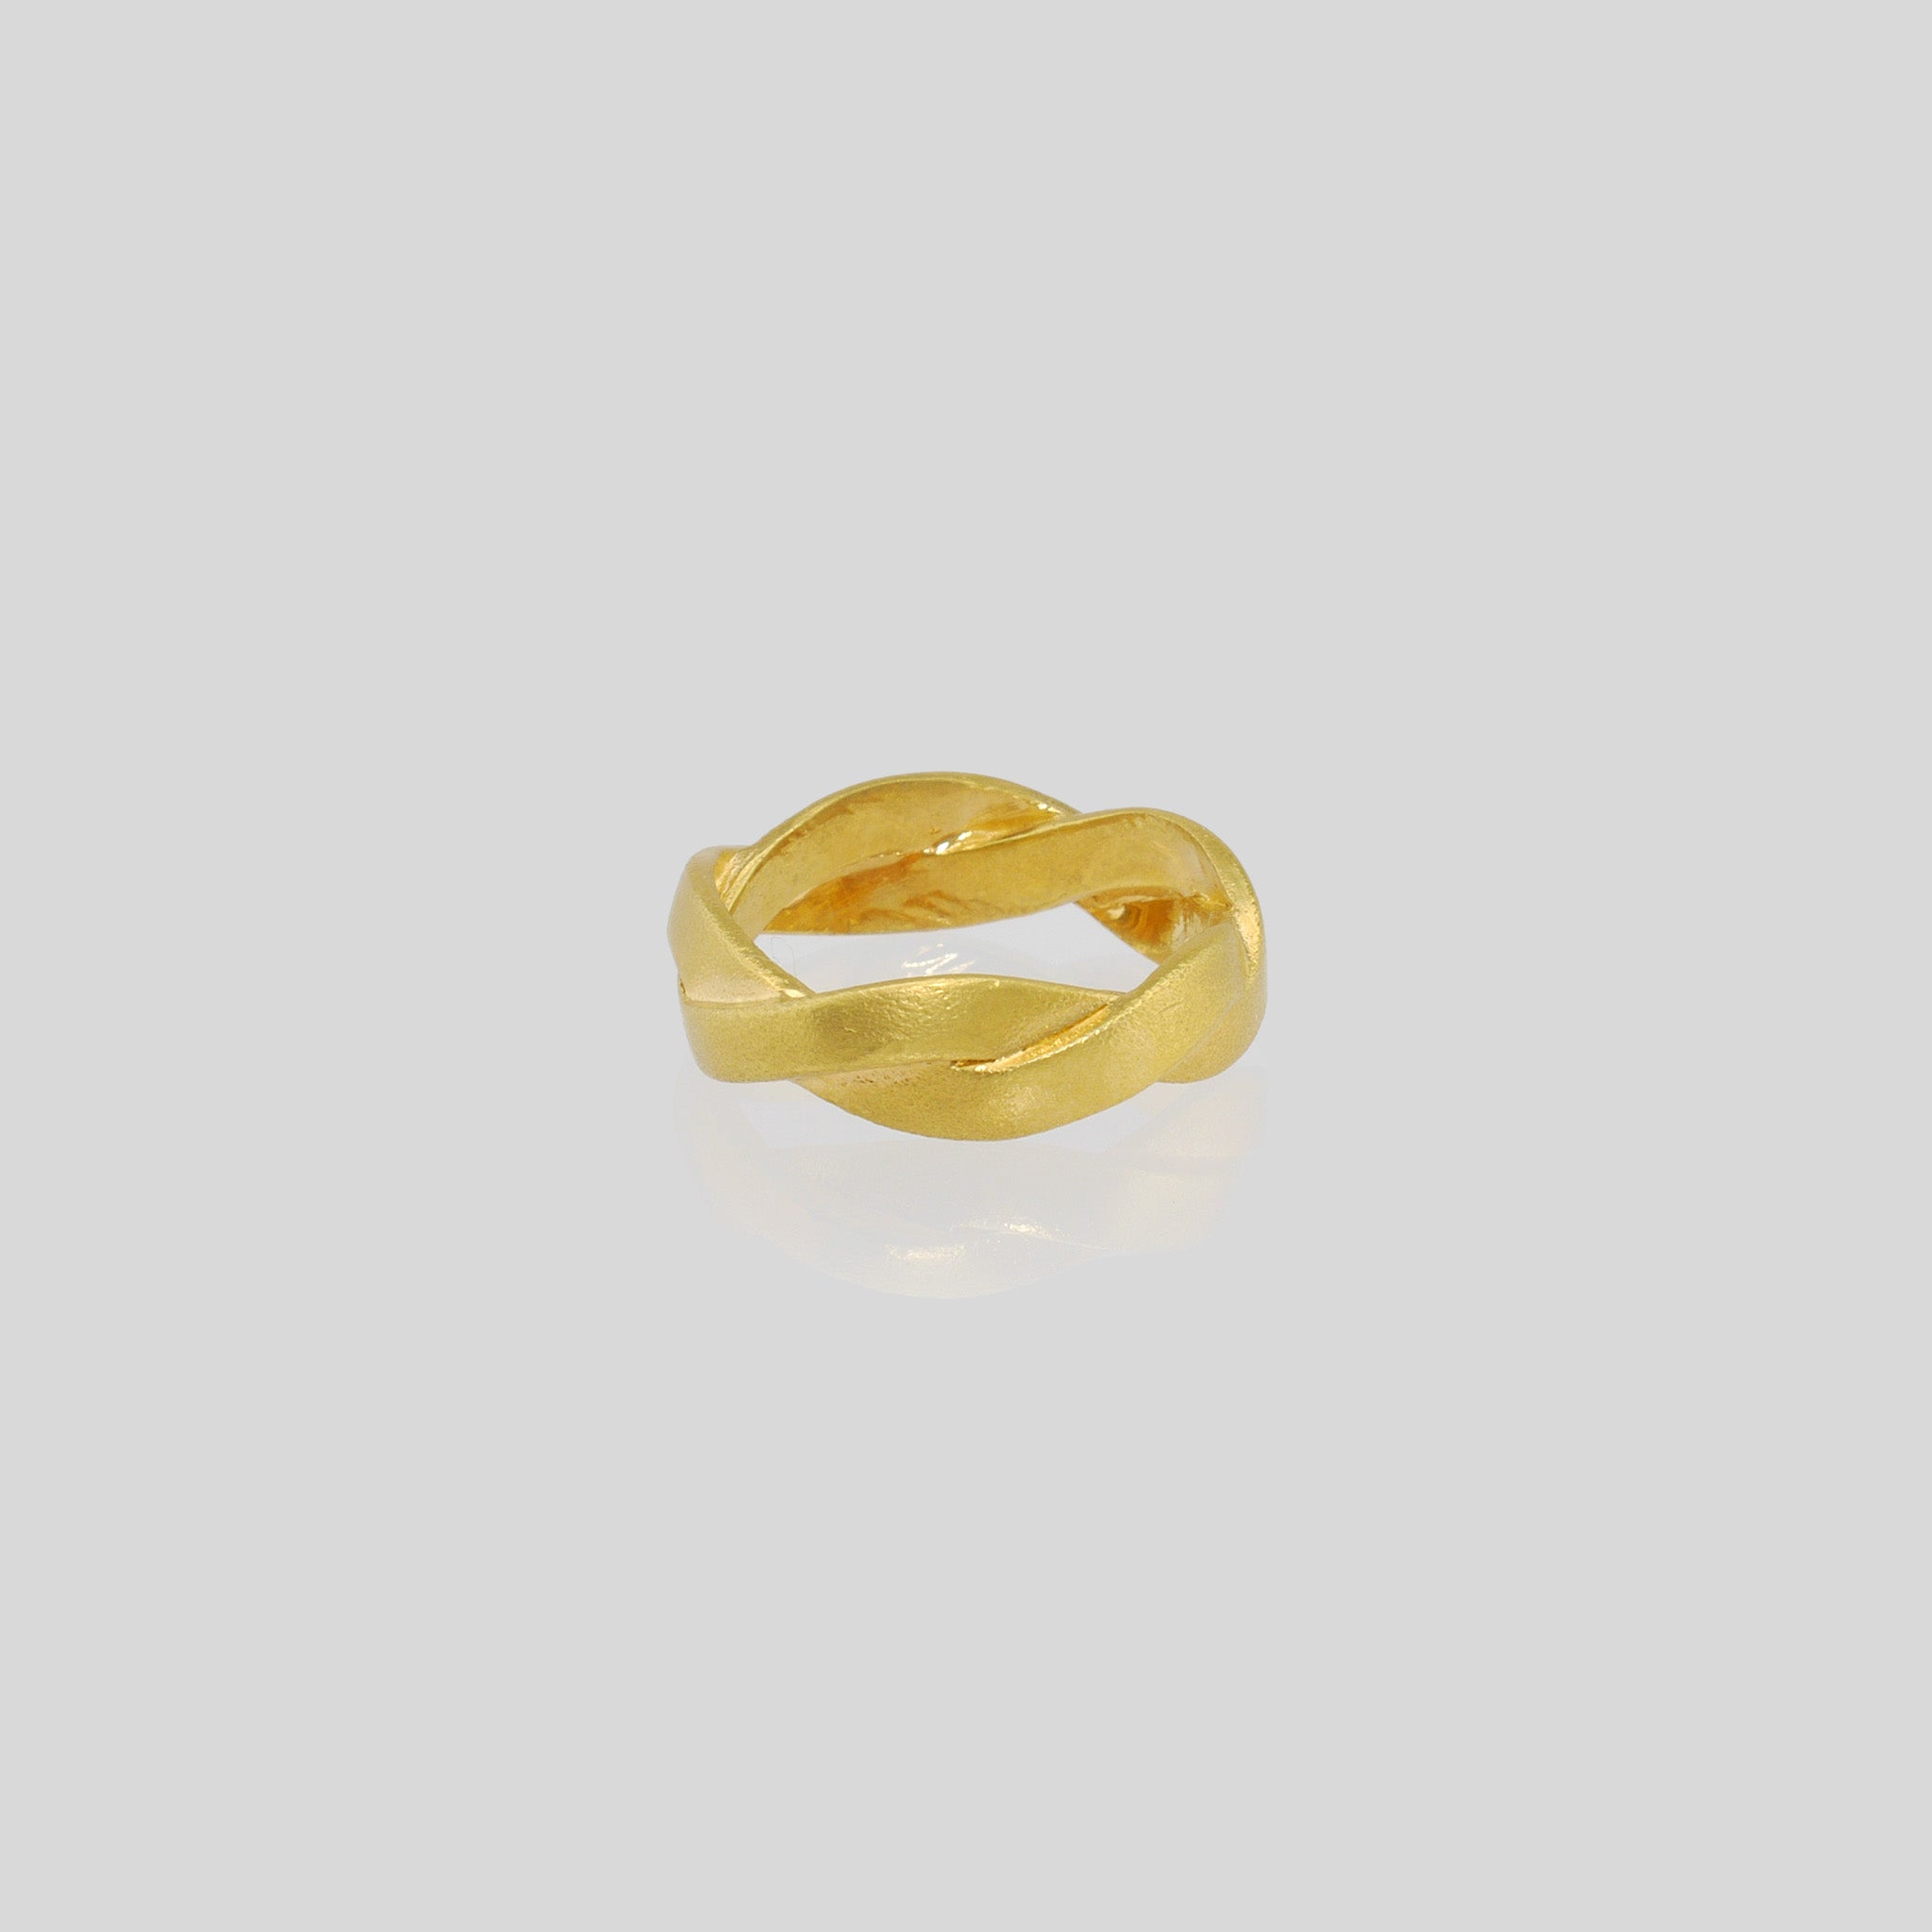 Hand-crafted ring made from Yellow Gold braids, offering an elegant and timeless touch to any attire. Intricately designed with subtle sophistication